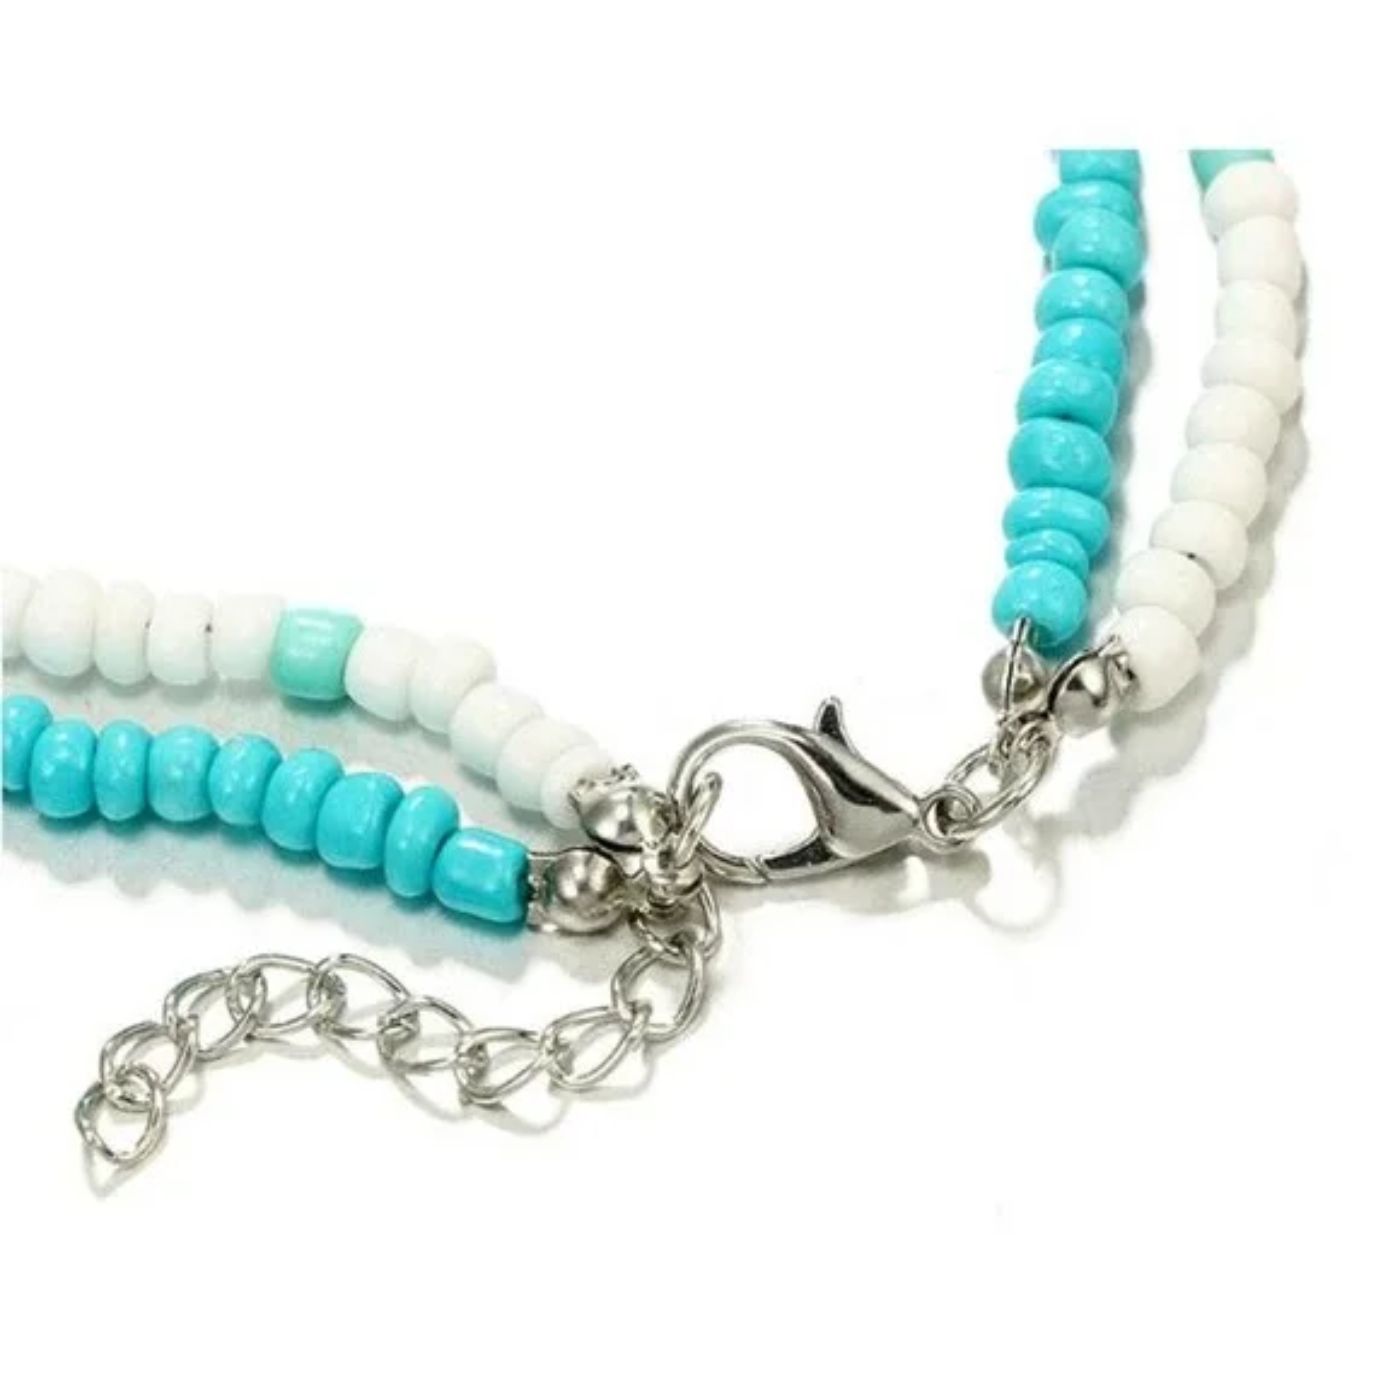 Summer Blue and White Beads 2 Layers Anklet Bracelet